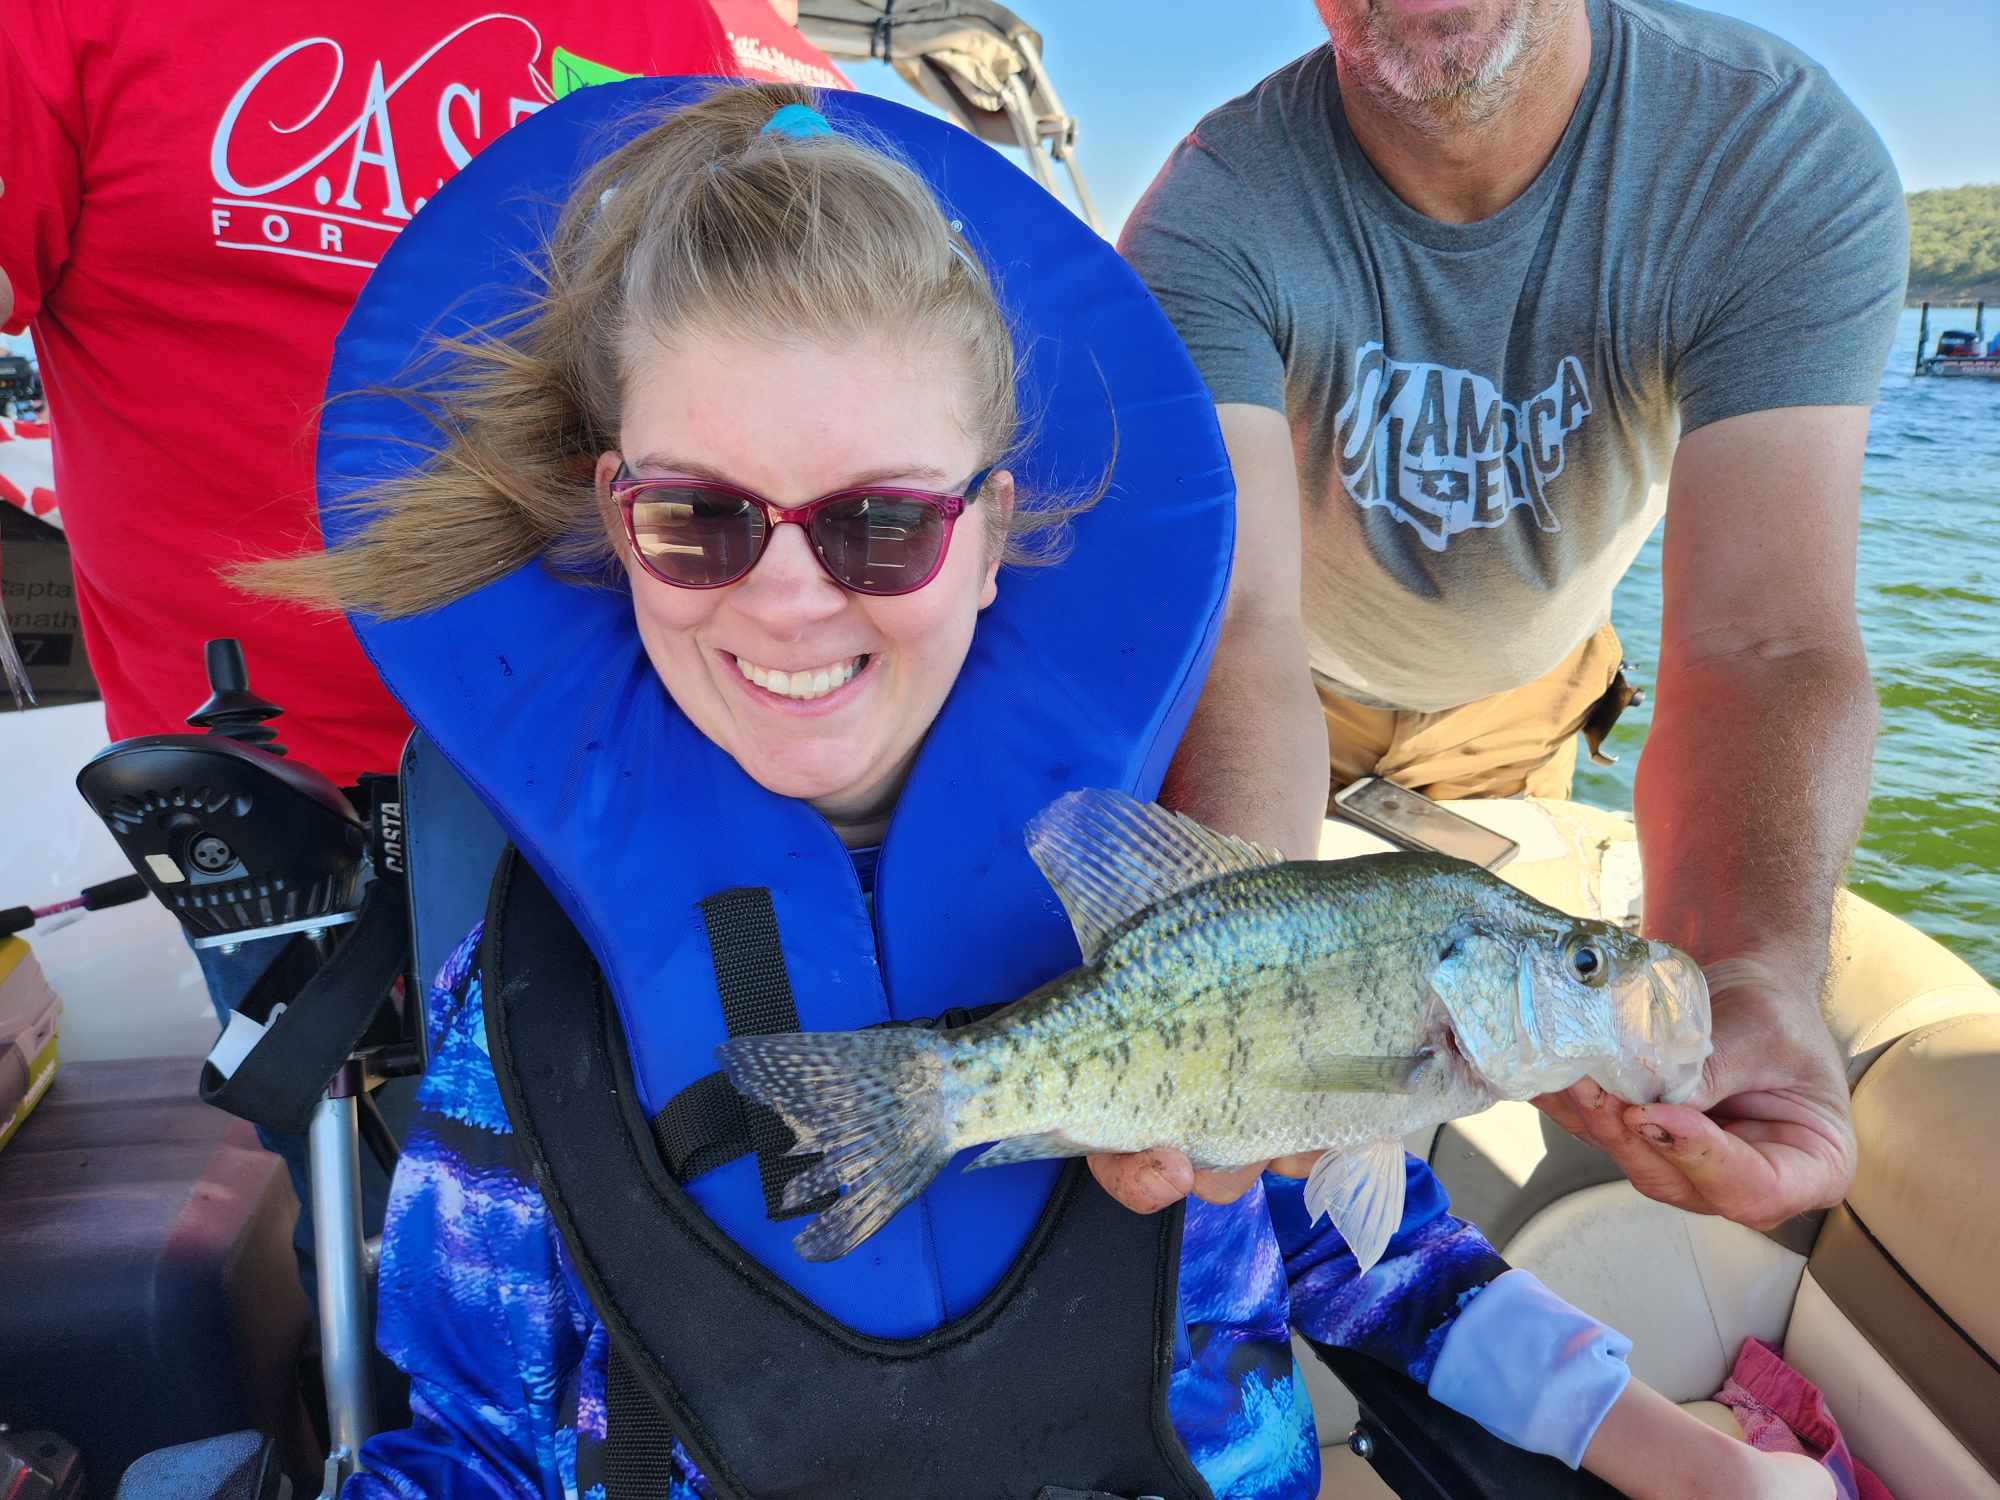 Mike Burnside on X: Kenzi got to fish in Cast for Kids Oklahoma event at  Skiatook Lake today; they gave her Zebco rod and reel, tackle box, gear,  lunch, and award. Quite